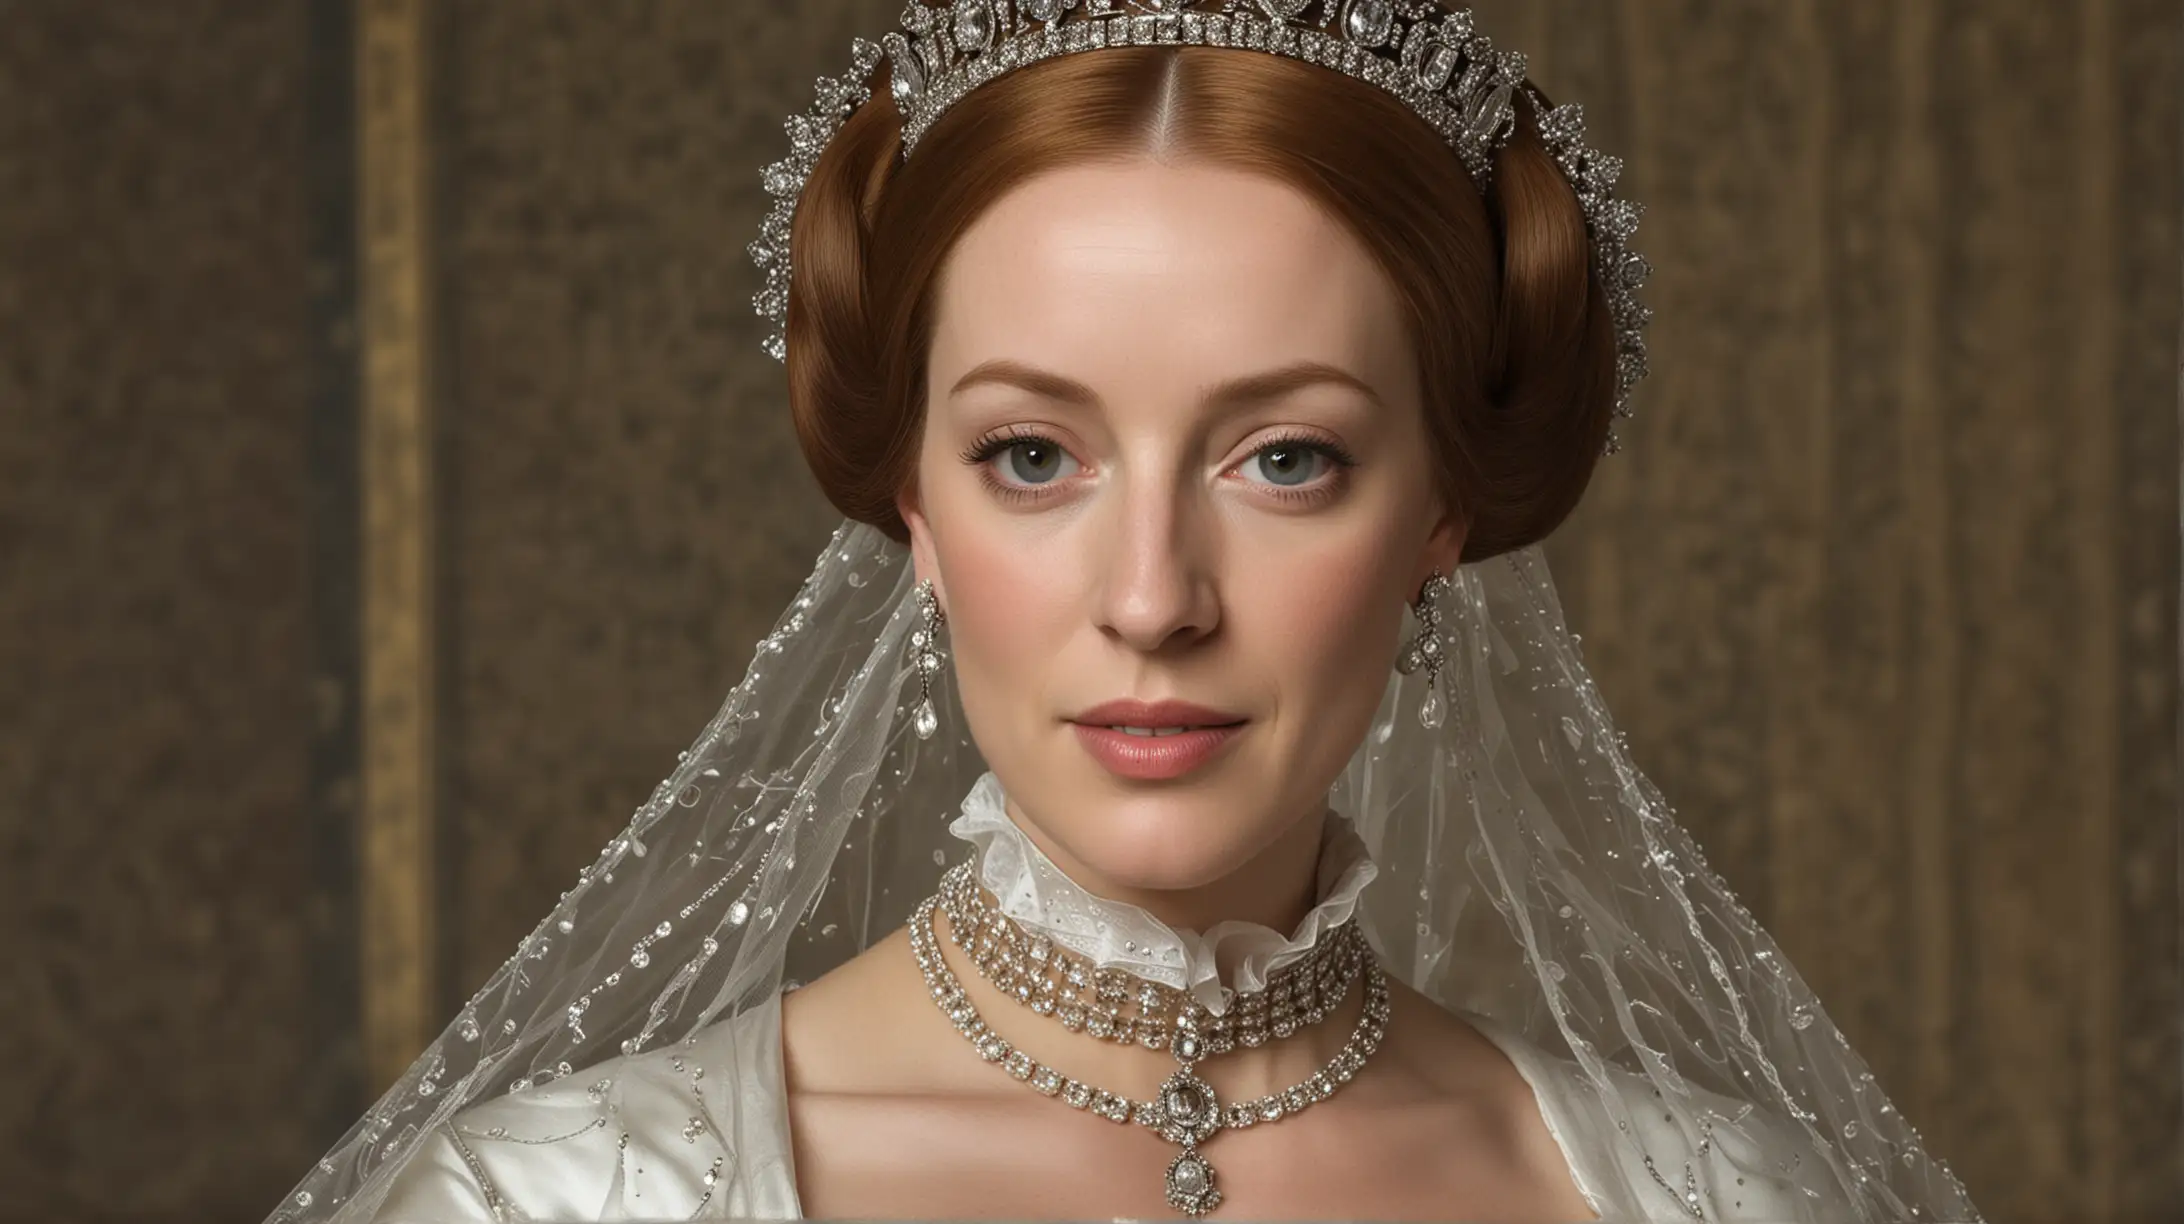 Portrait of Mary I of England Captured with Professional Photography